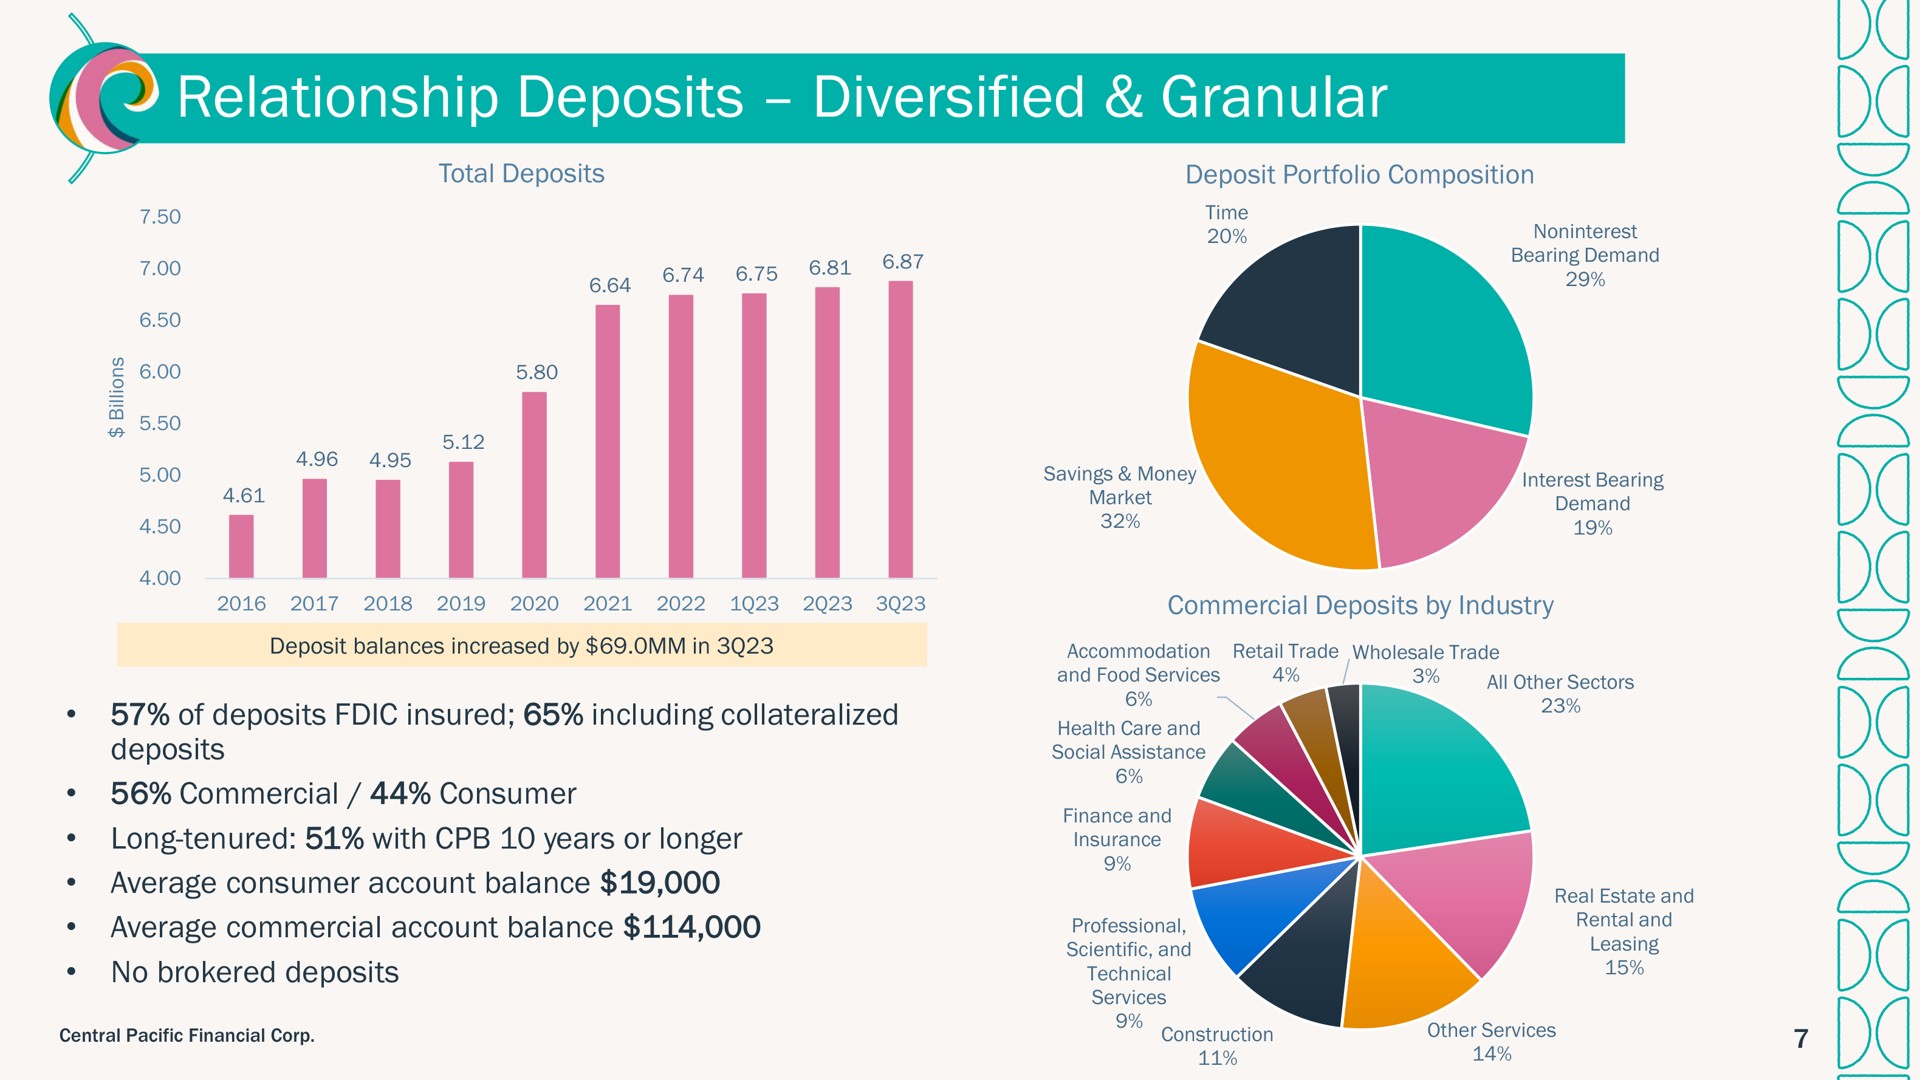 relationship deposits diversified granular i | Central Pacific Financial